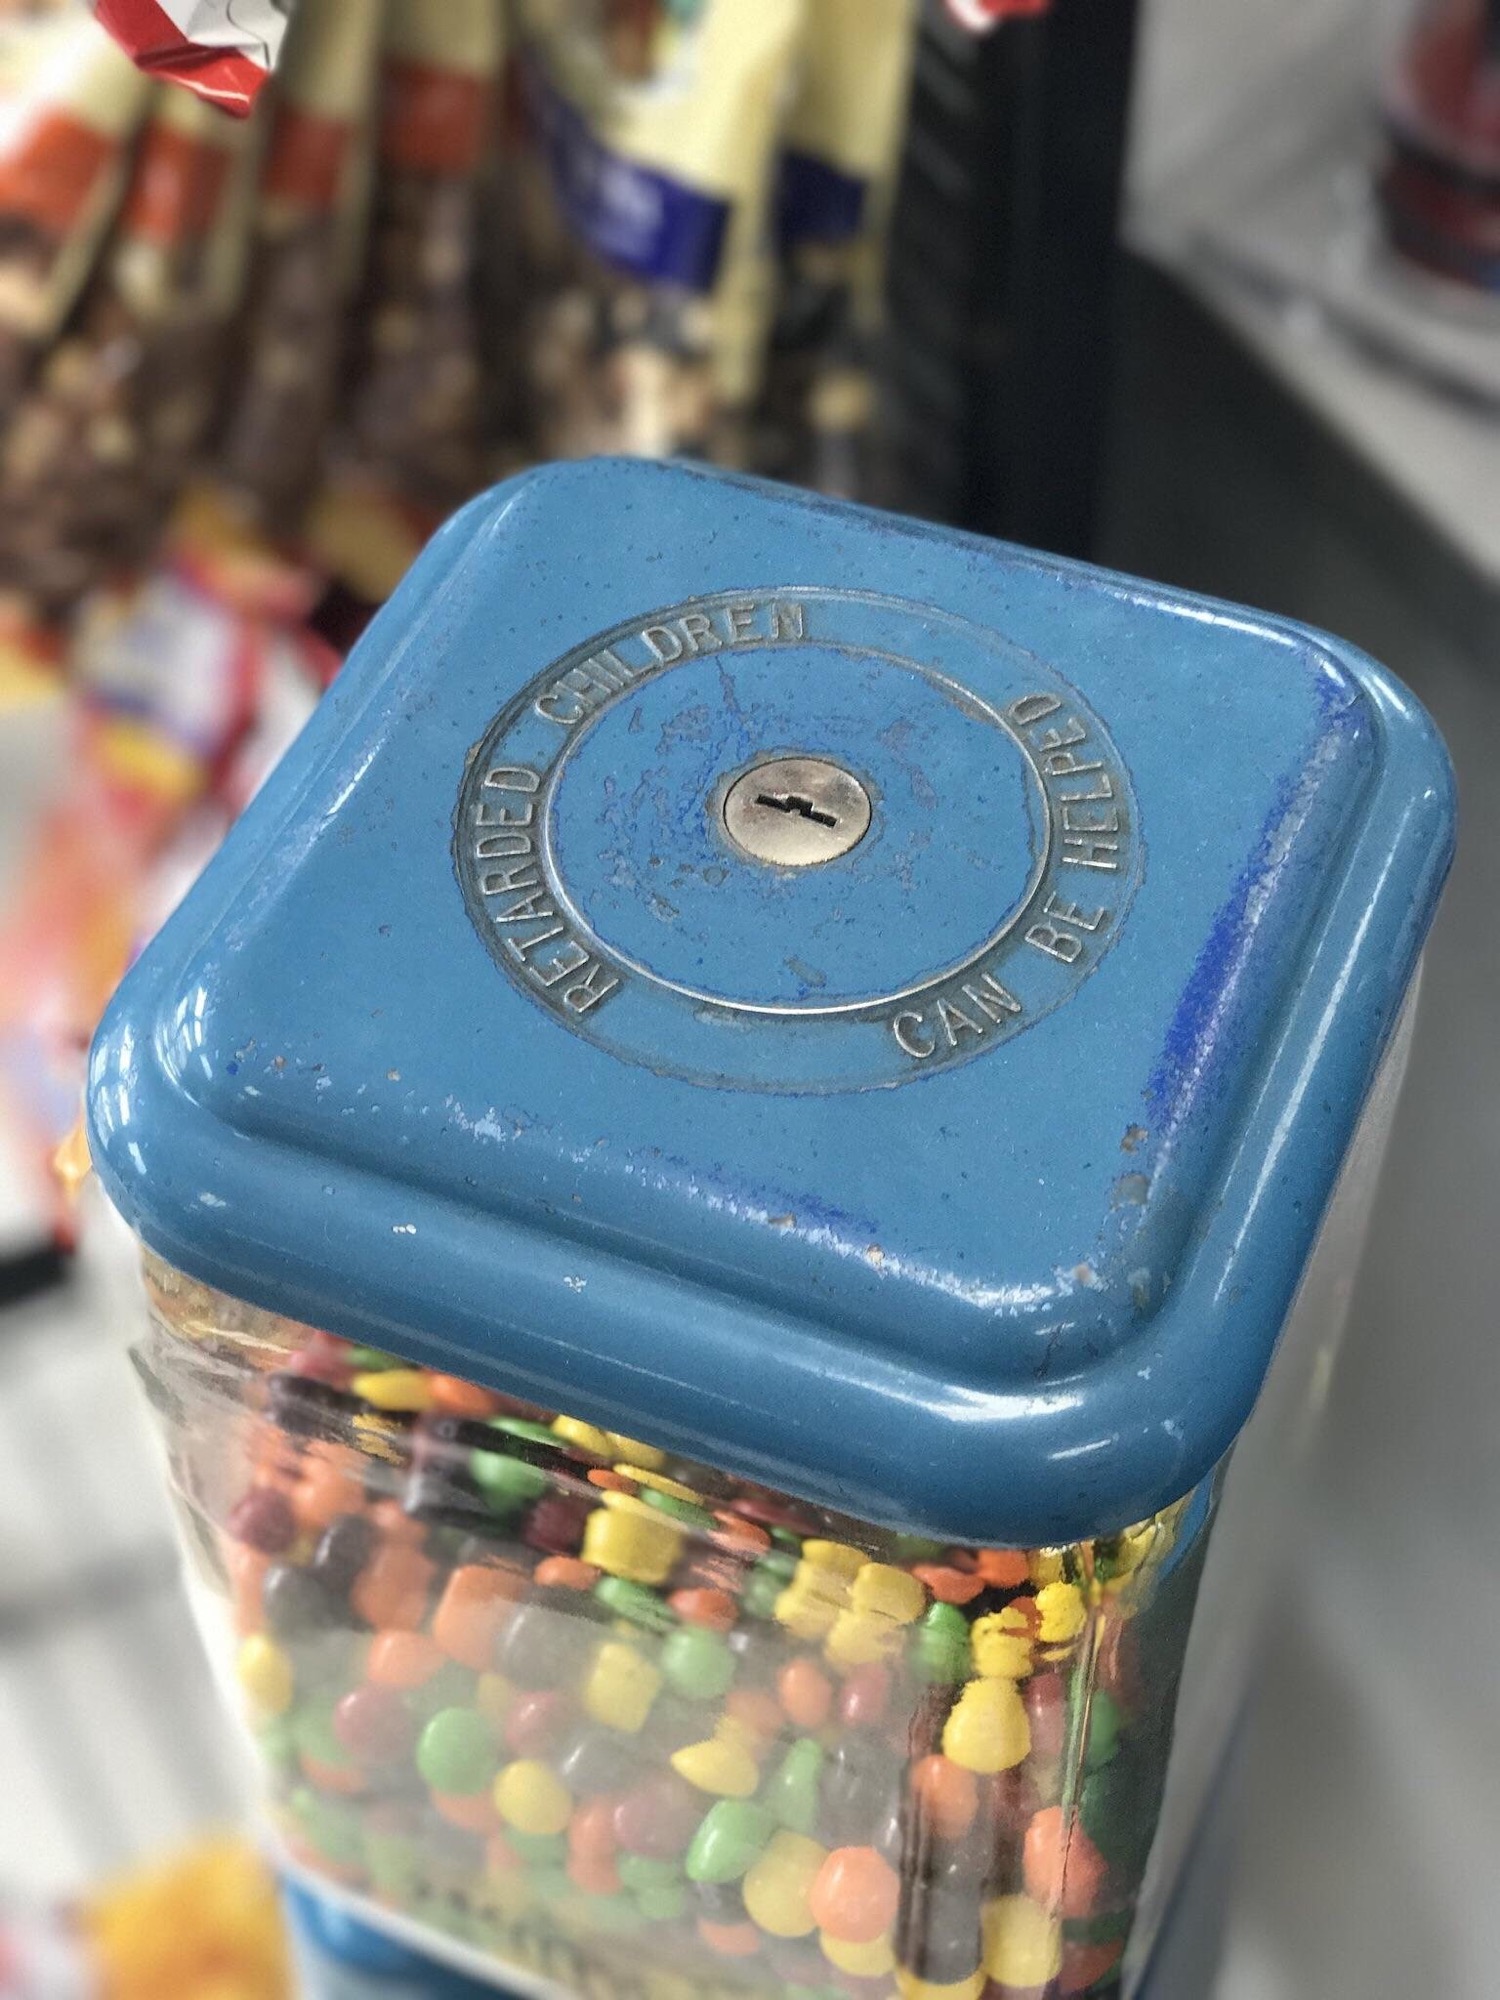 ~1974 candy dispensers had a different vibe about them...